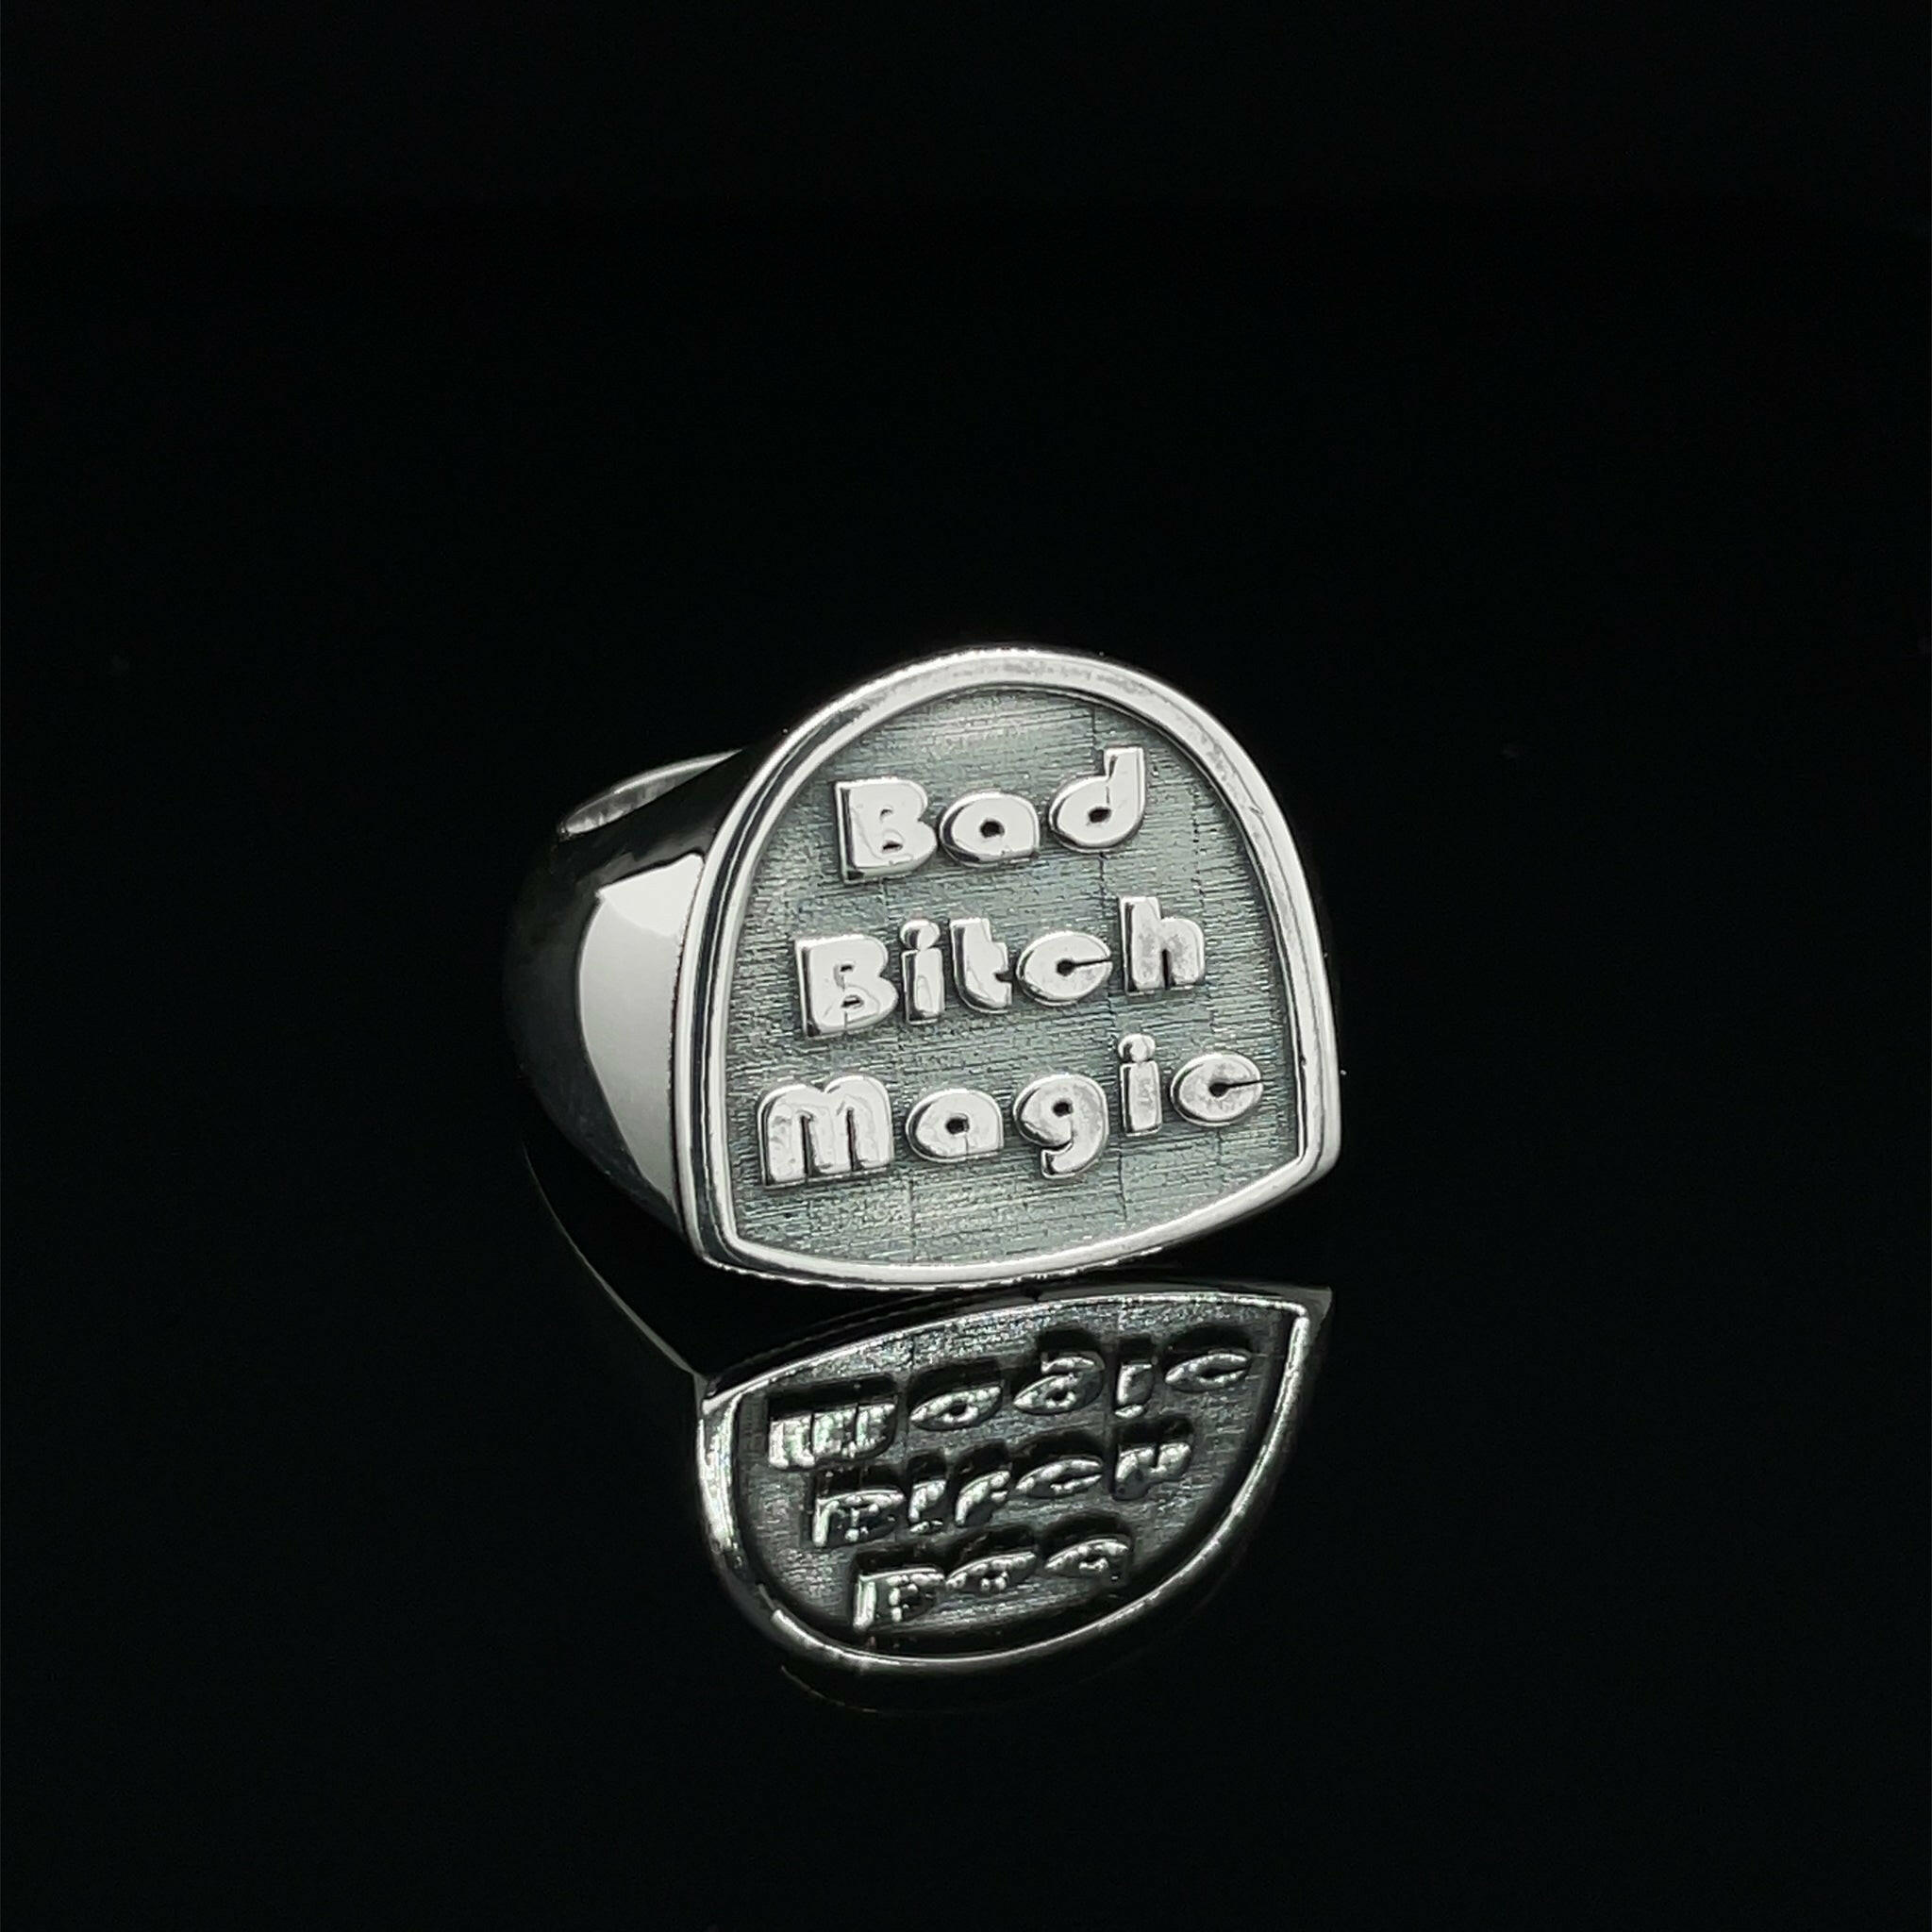 front left angle of sterling silver ring that reads "bad bitch magic"